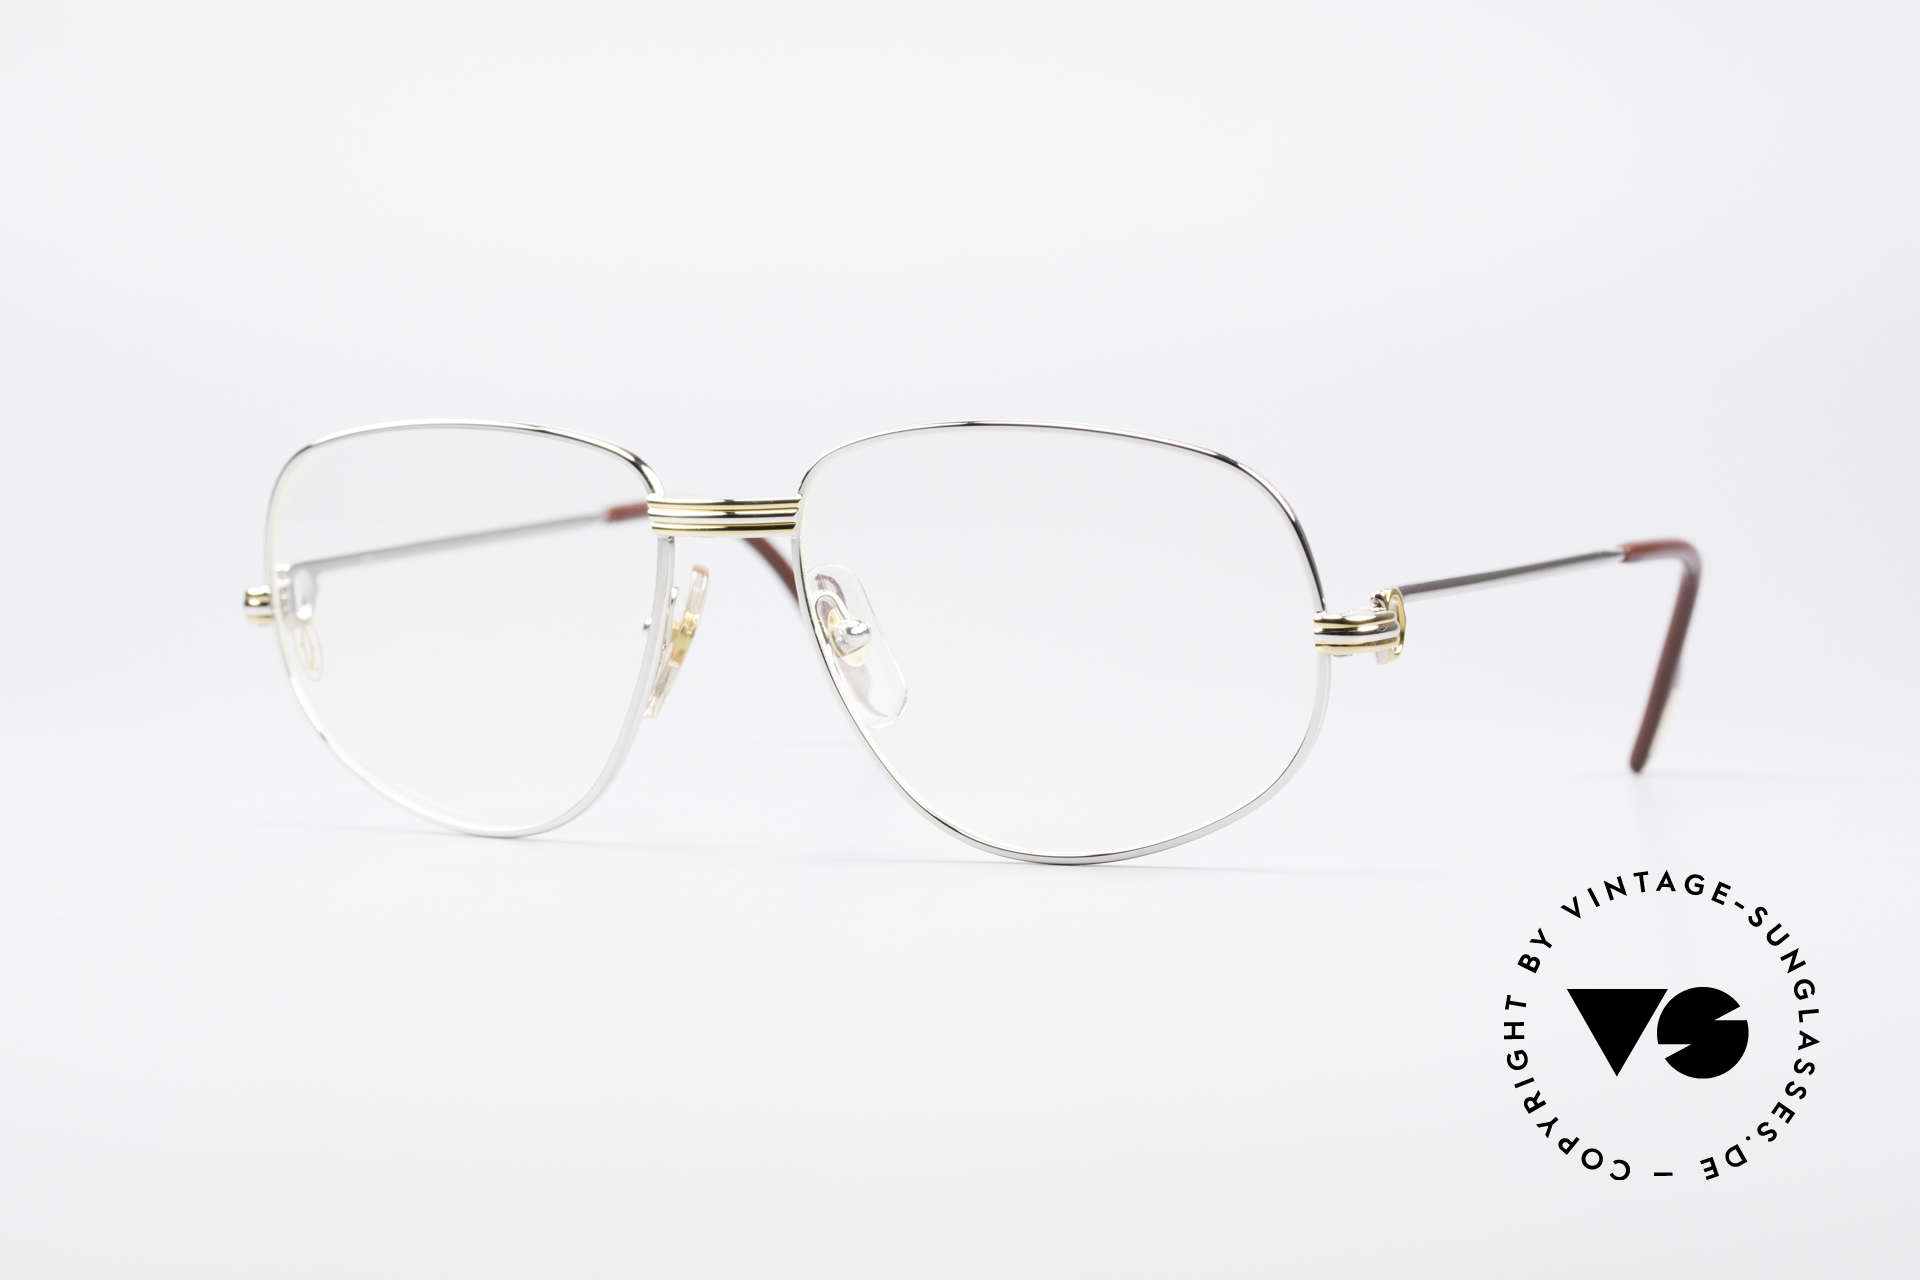 Cartier Romance LC - M Platinum Finish Glasses, vintage Cartier eyeglasses; model ROMANCE Louis Cartier, Made for Men and Women